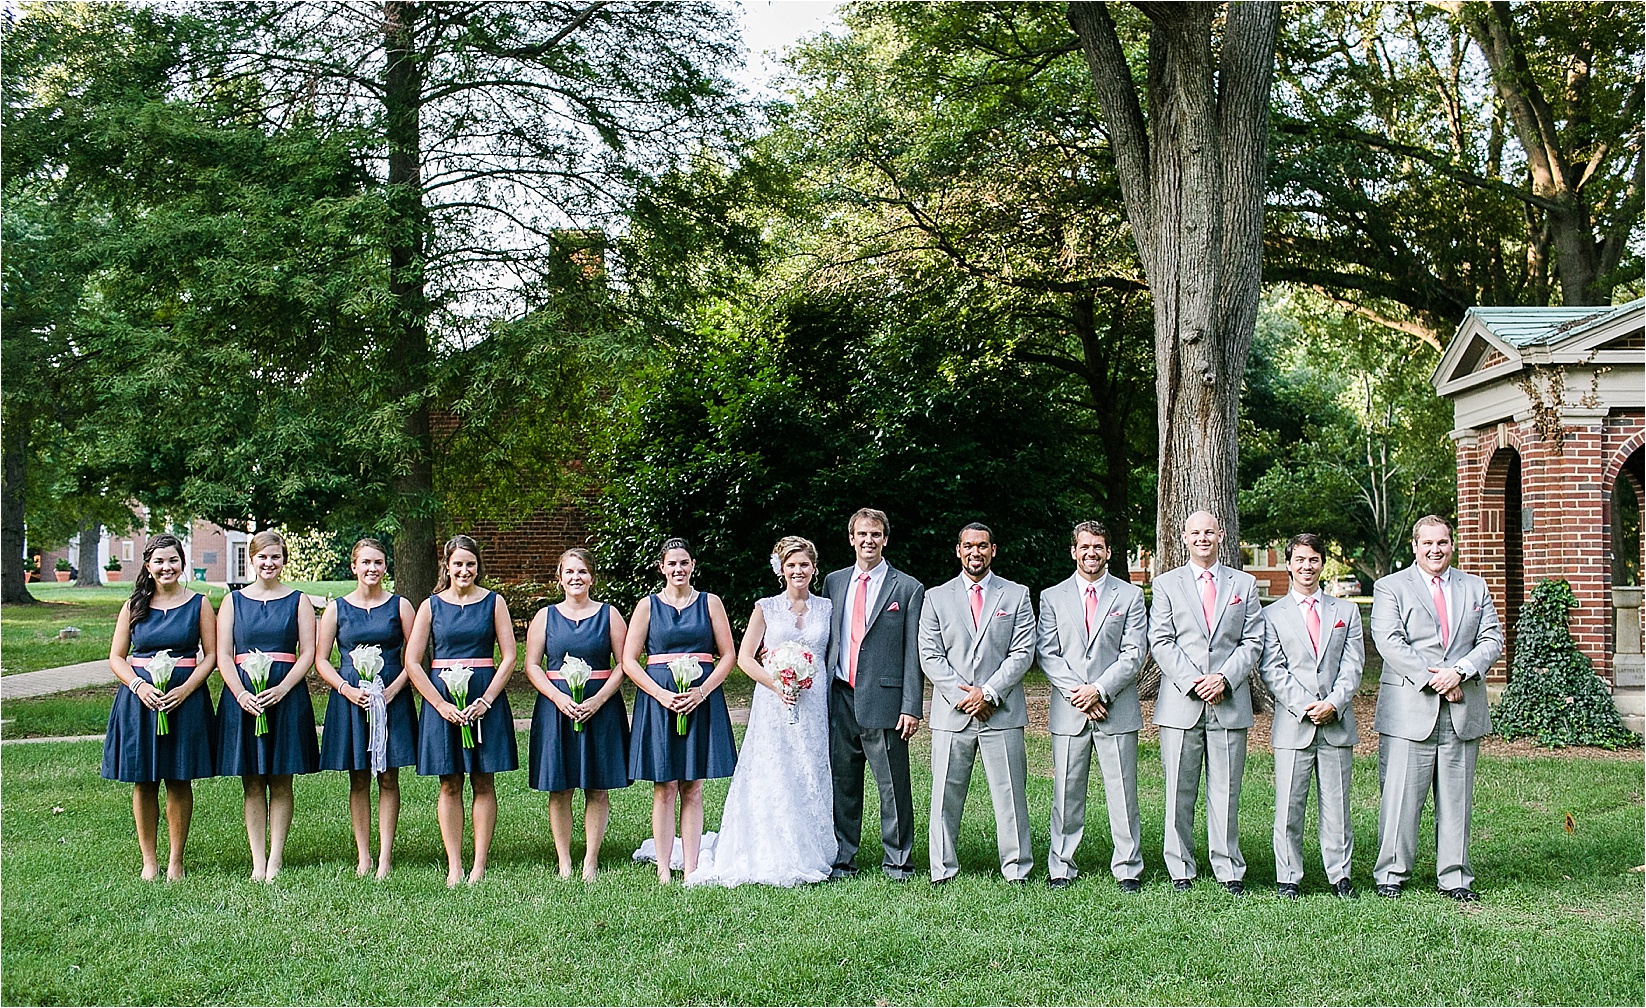 Bridal party at the davidson college chapel wedding in Davidson north Carolina and the Charles mack citizen center wedding and reception